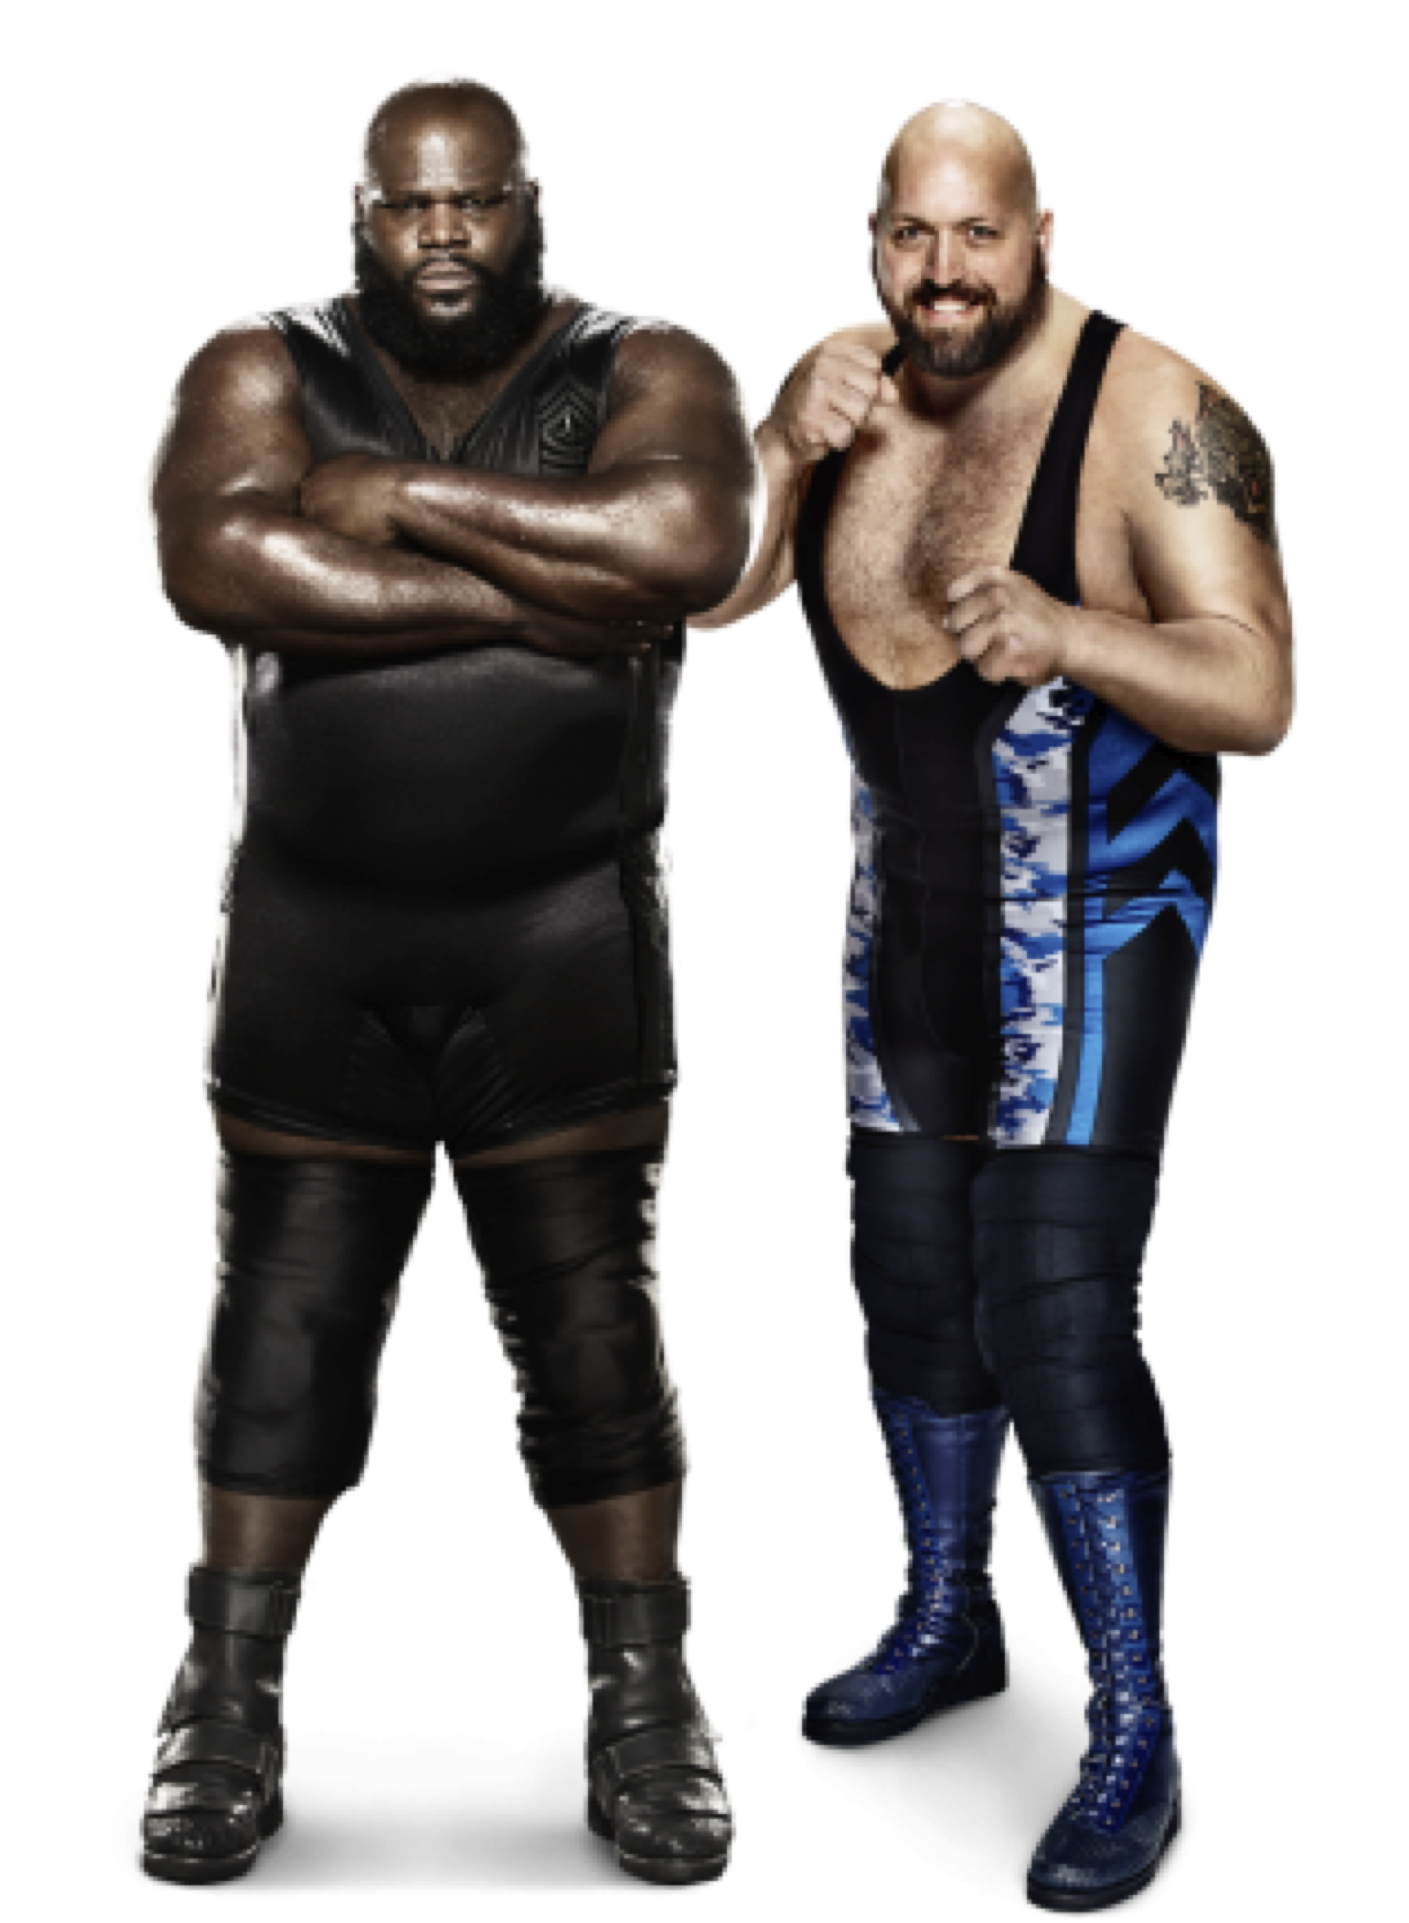 https://static.wikia.nocookie.net/prowrestling/images/3/3b/Mark-Henry-Big-Show.png/revision/latest?cb=20140819174722